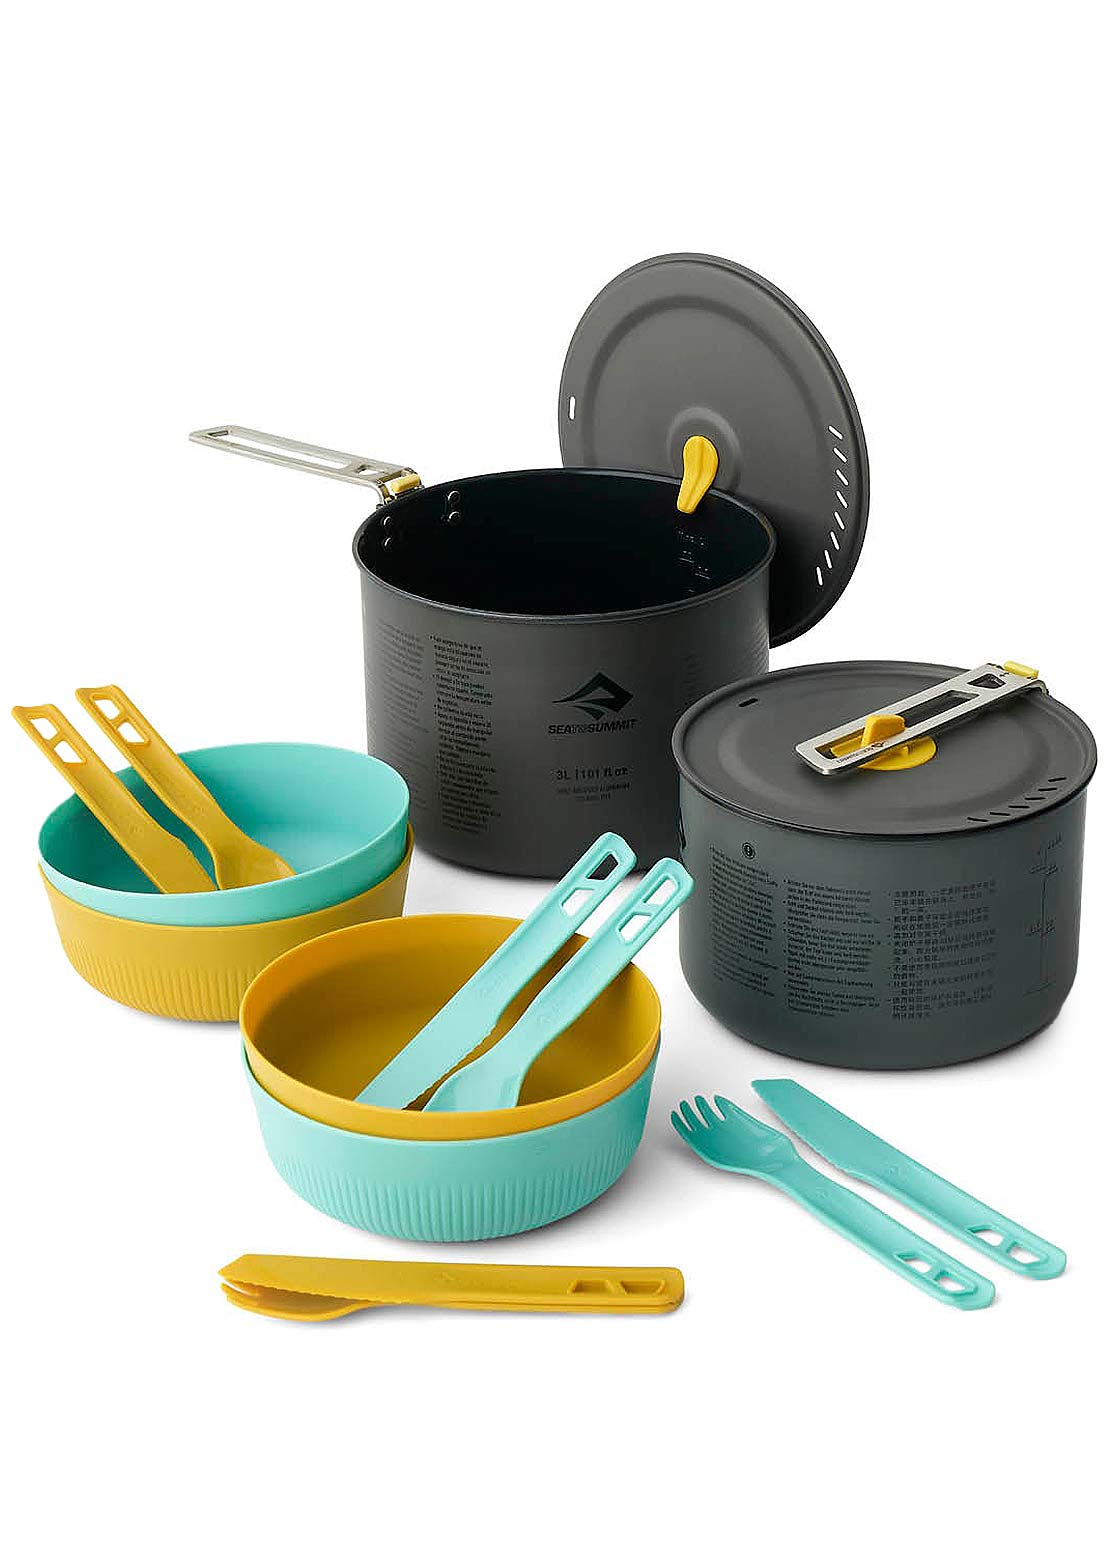 Sea To Summit Frontier UL Two Pot Cook Set - 4 Person